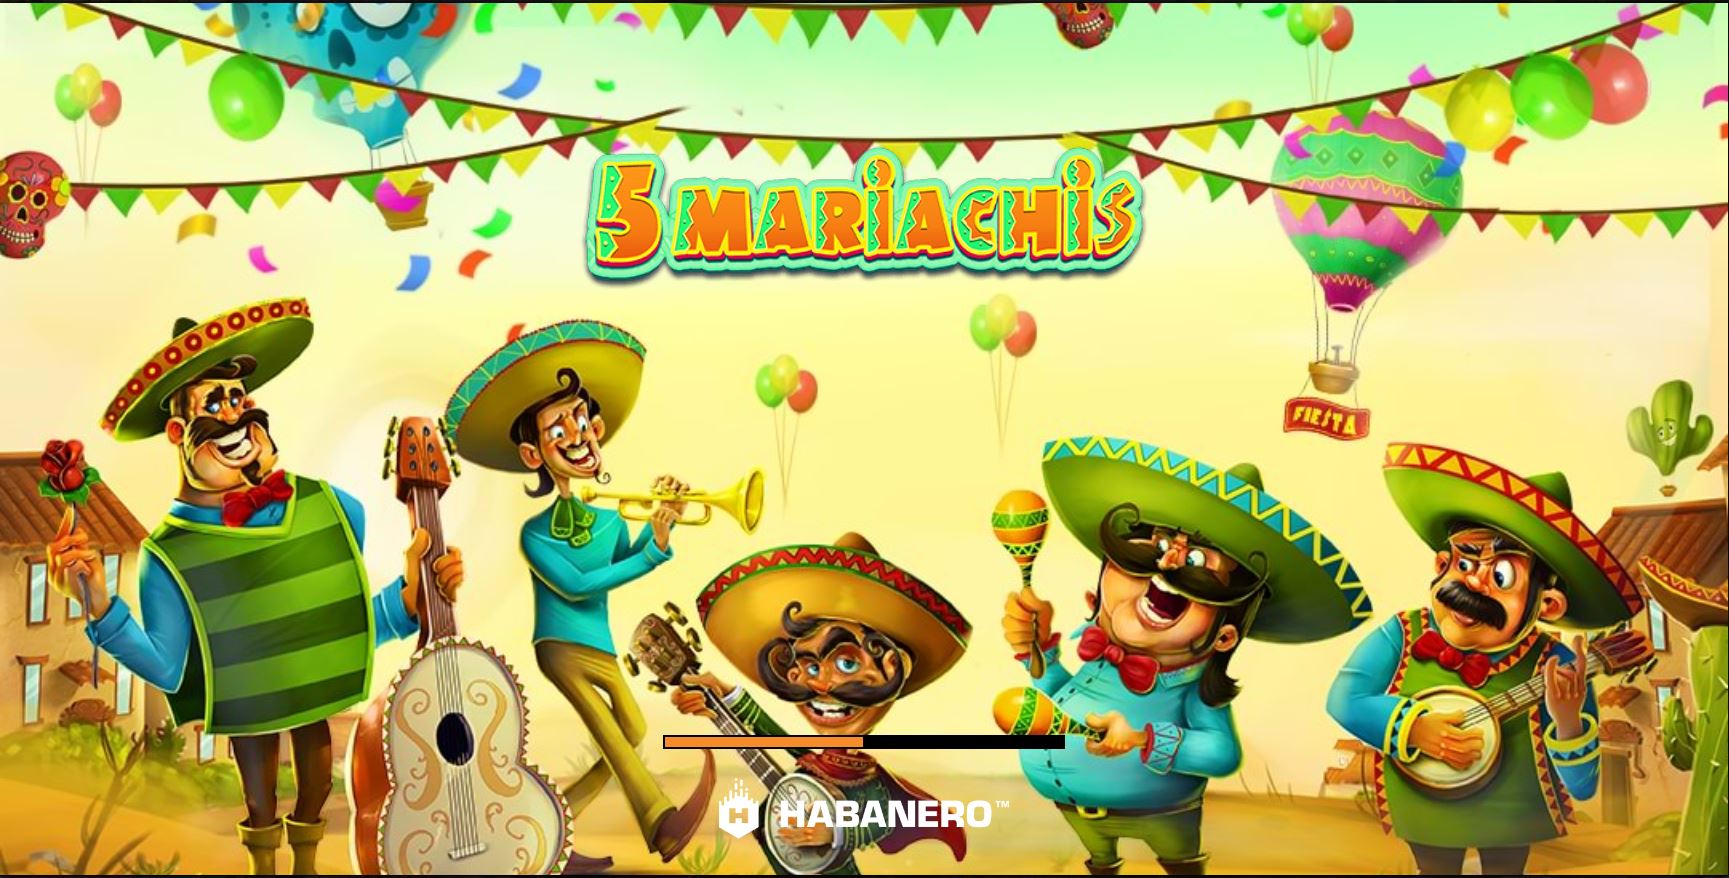 Slot Online 5 Mariachis Review